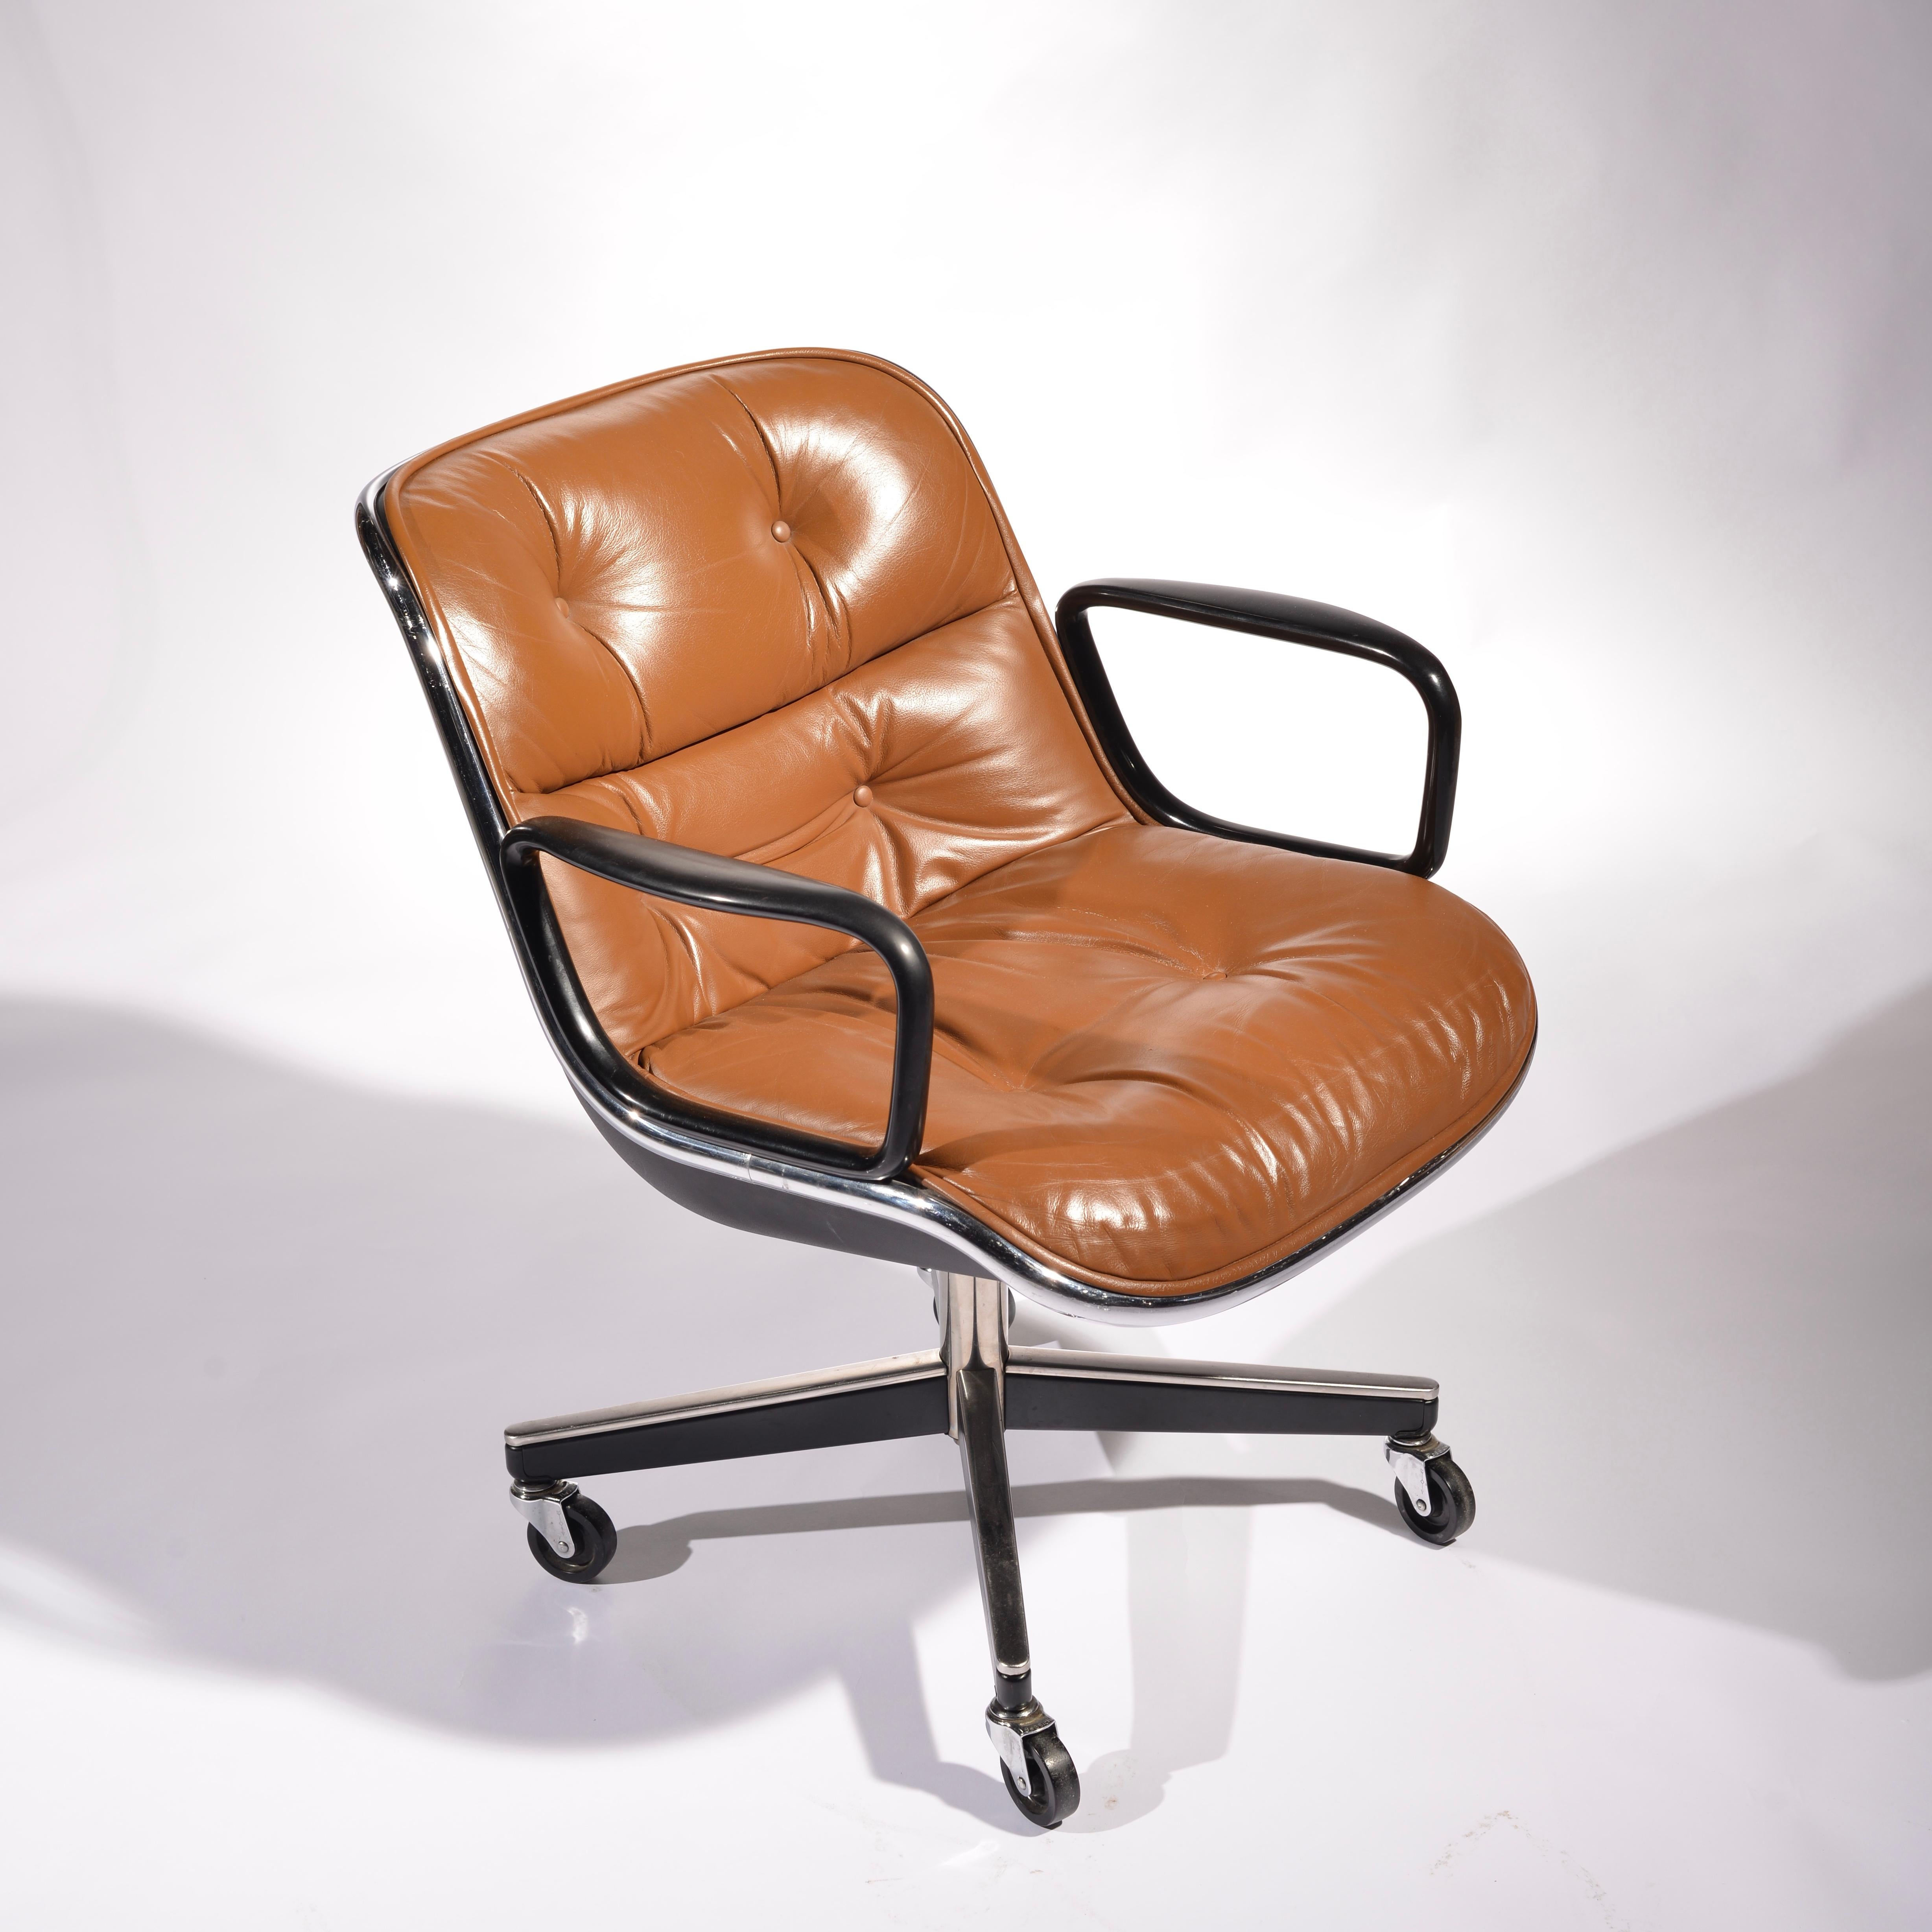 Mid-Century Modern Charles Pollock Executive Desk Chairs for Knoll in Cognac Leather